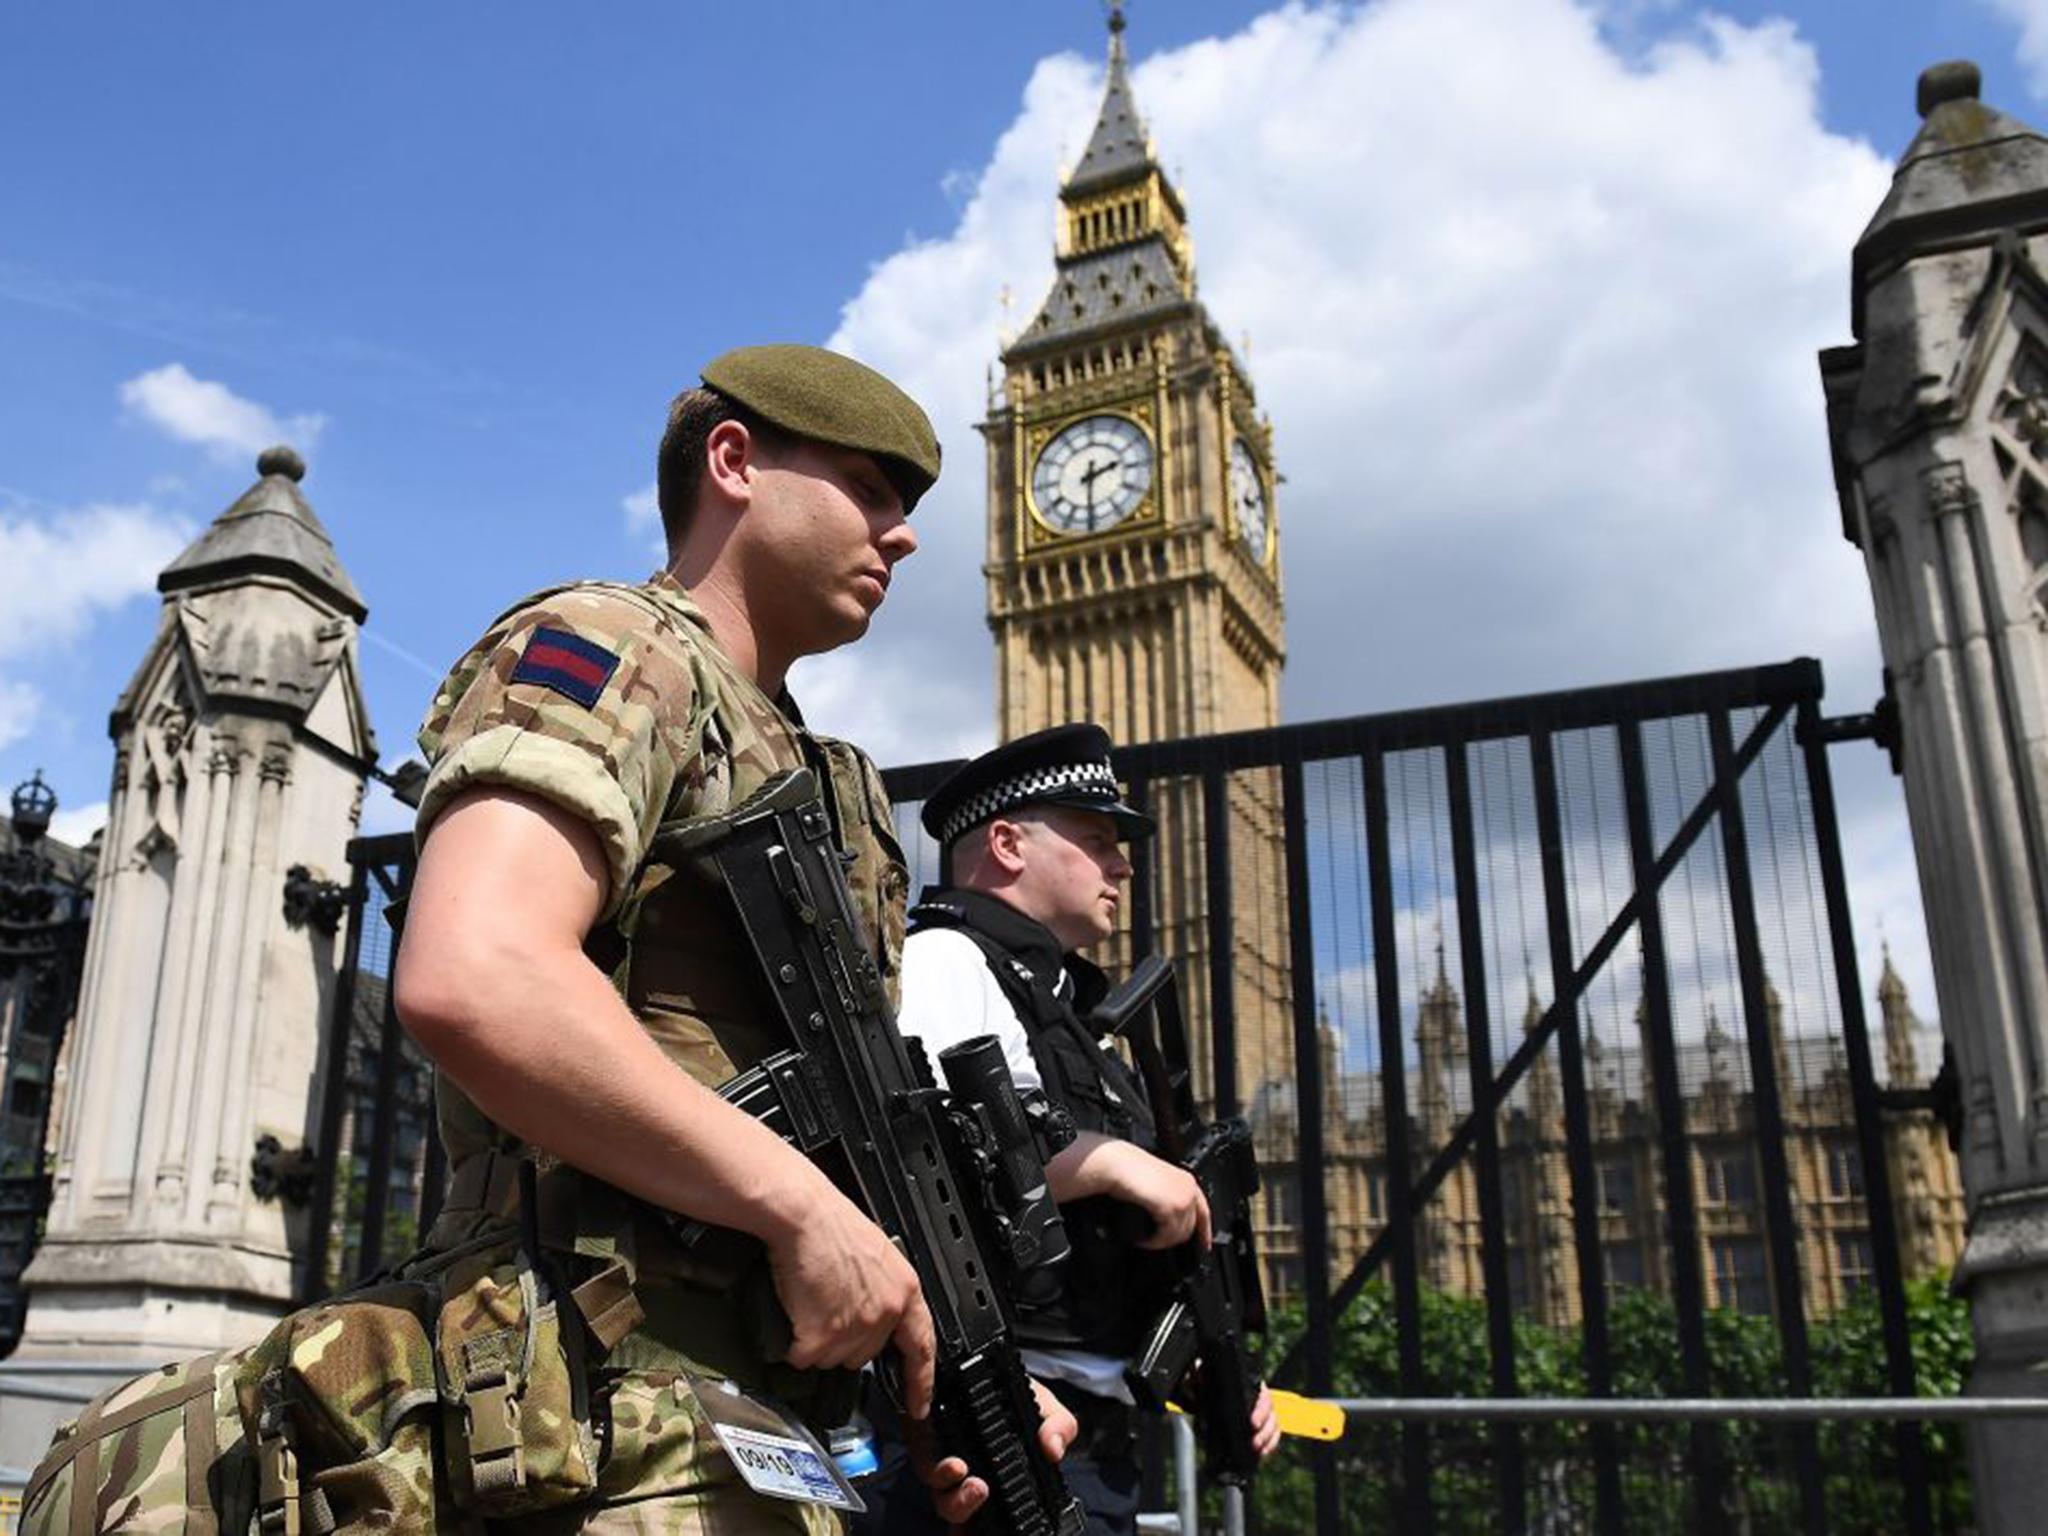 A soldier and armed police officer patrol along Whitehall